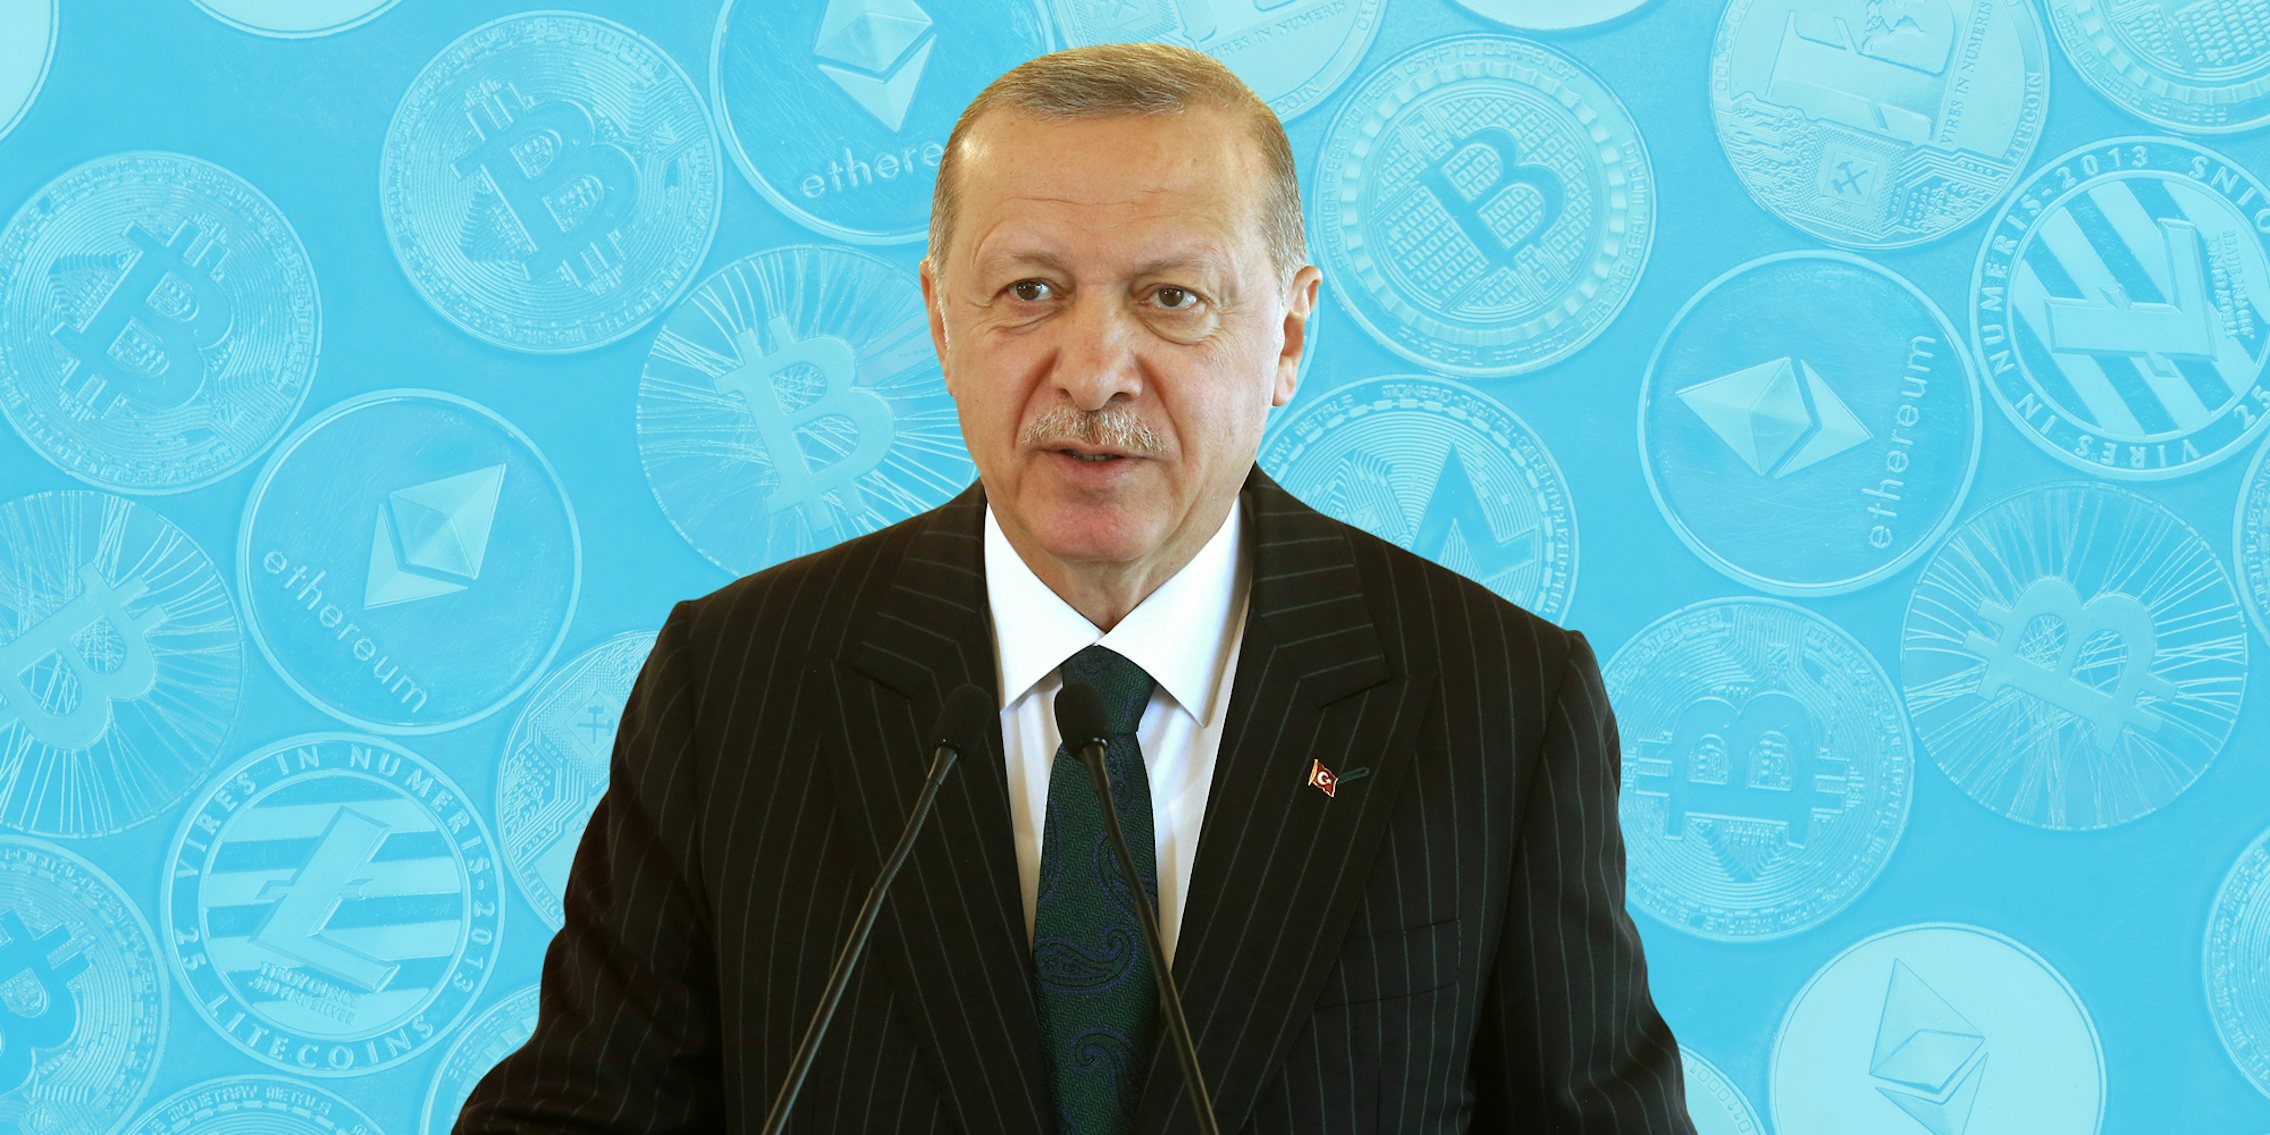 Recep Tayyip Erdogan speaking into microphone in front of blue crypto background